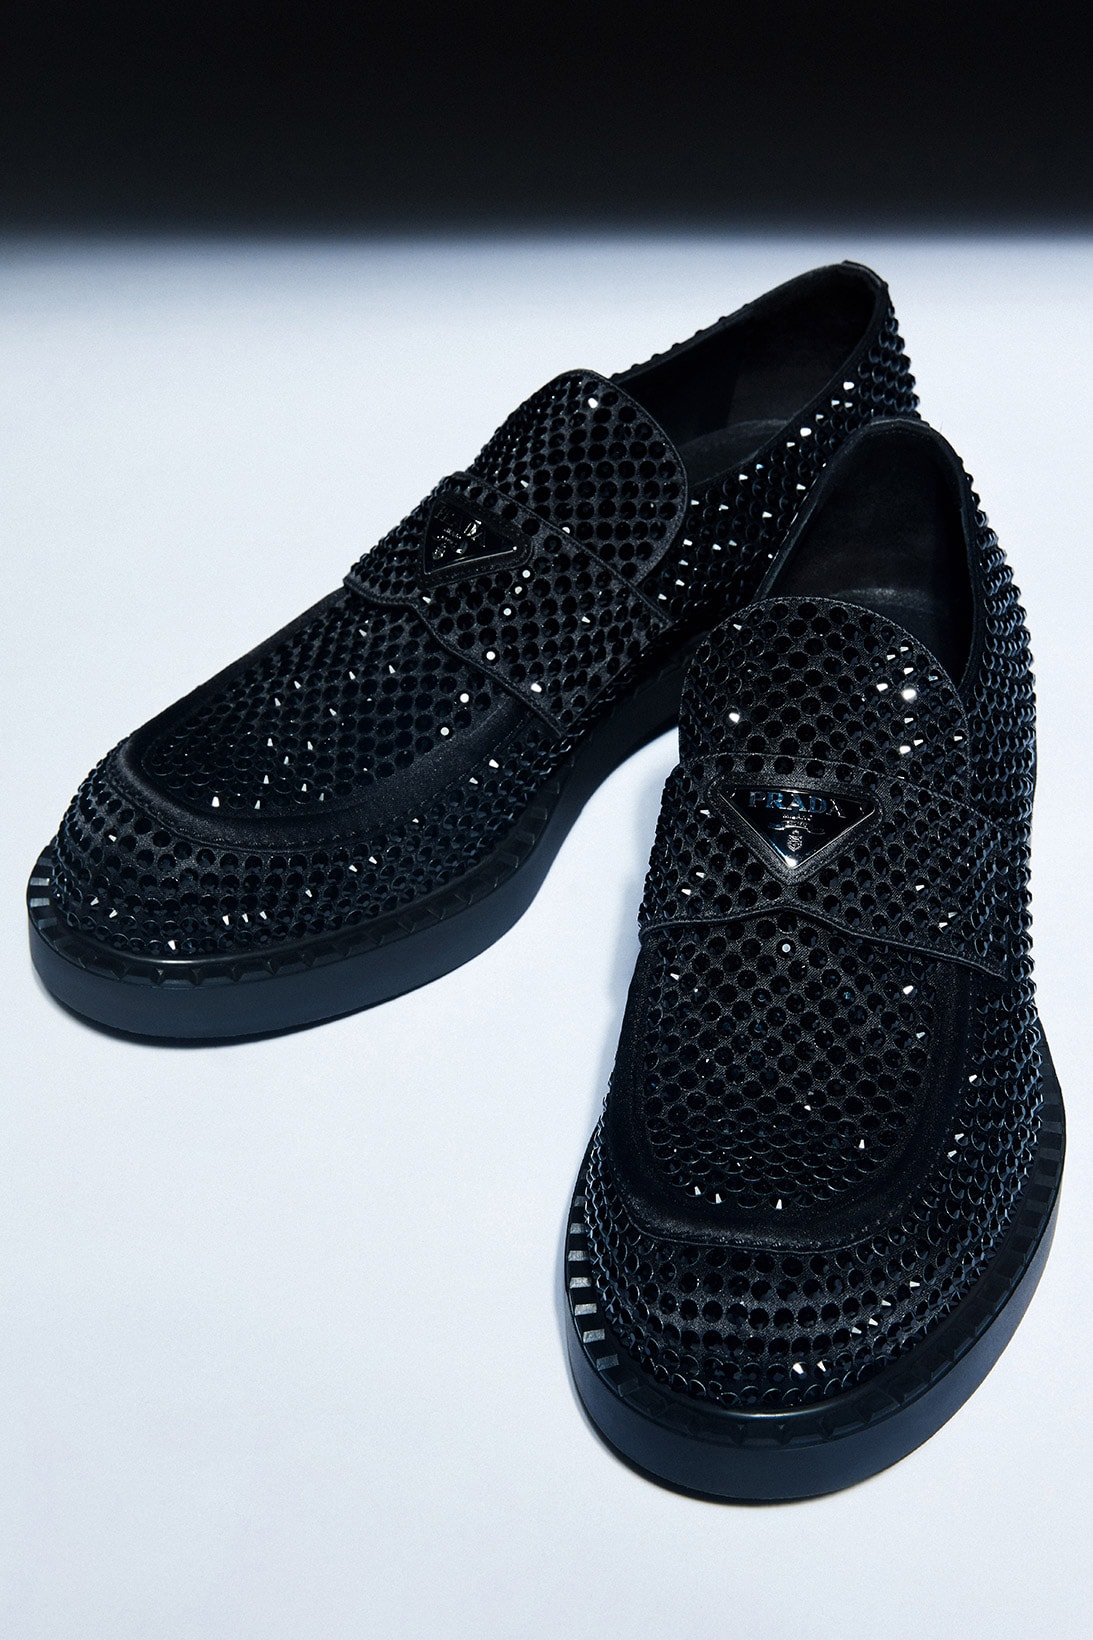 Prada Chinese Valentines Day Qixi Festival loafers black crystals